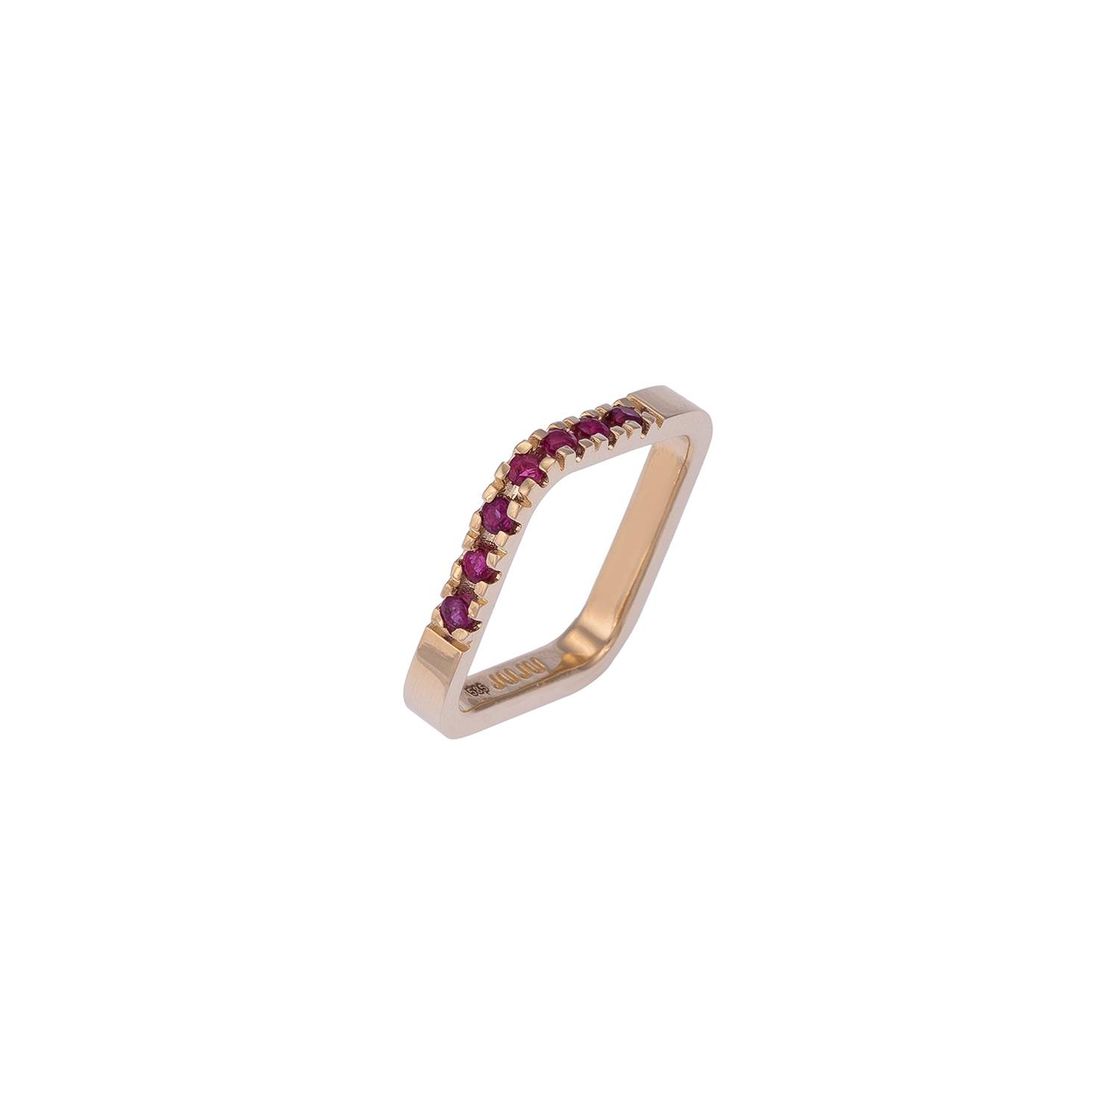 Corner Gold Ring with Ruby Stones